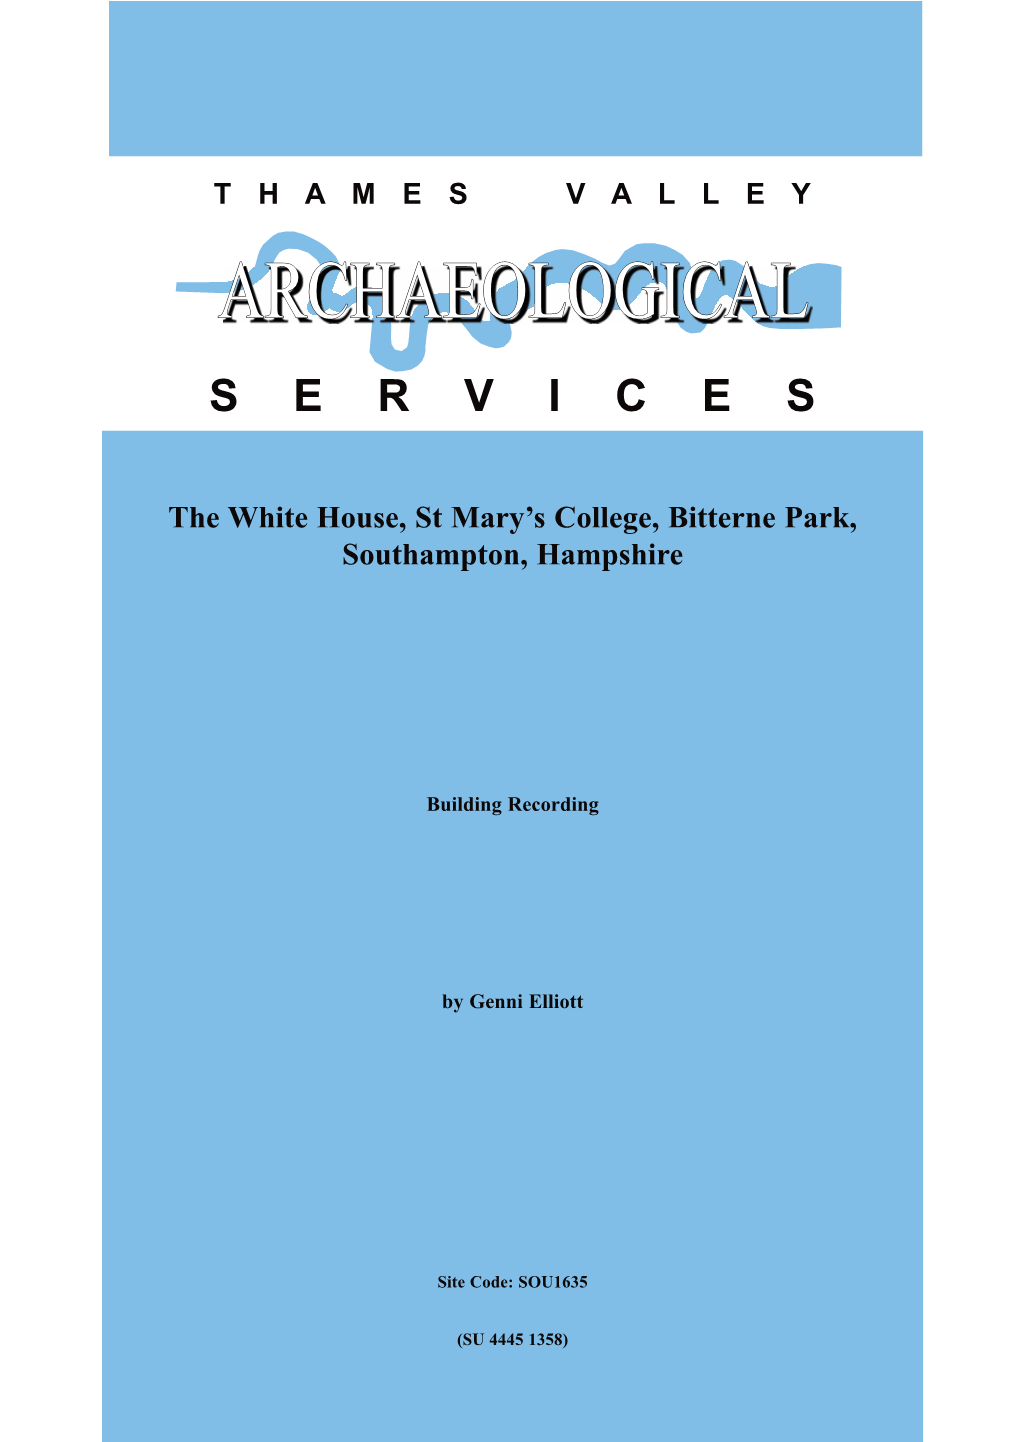 Thames Valley Archaeological Services, Reading and Will Be Deposited with Southampton Museum in Due Course